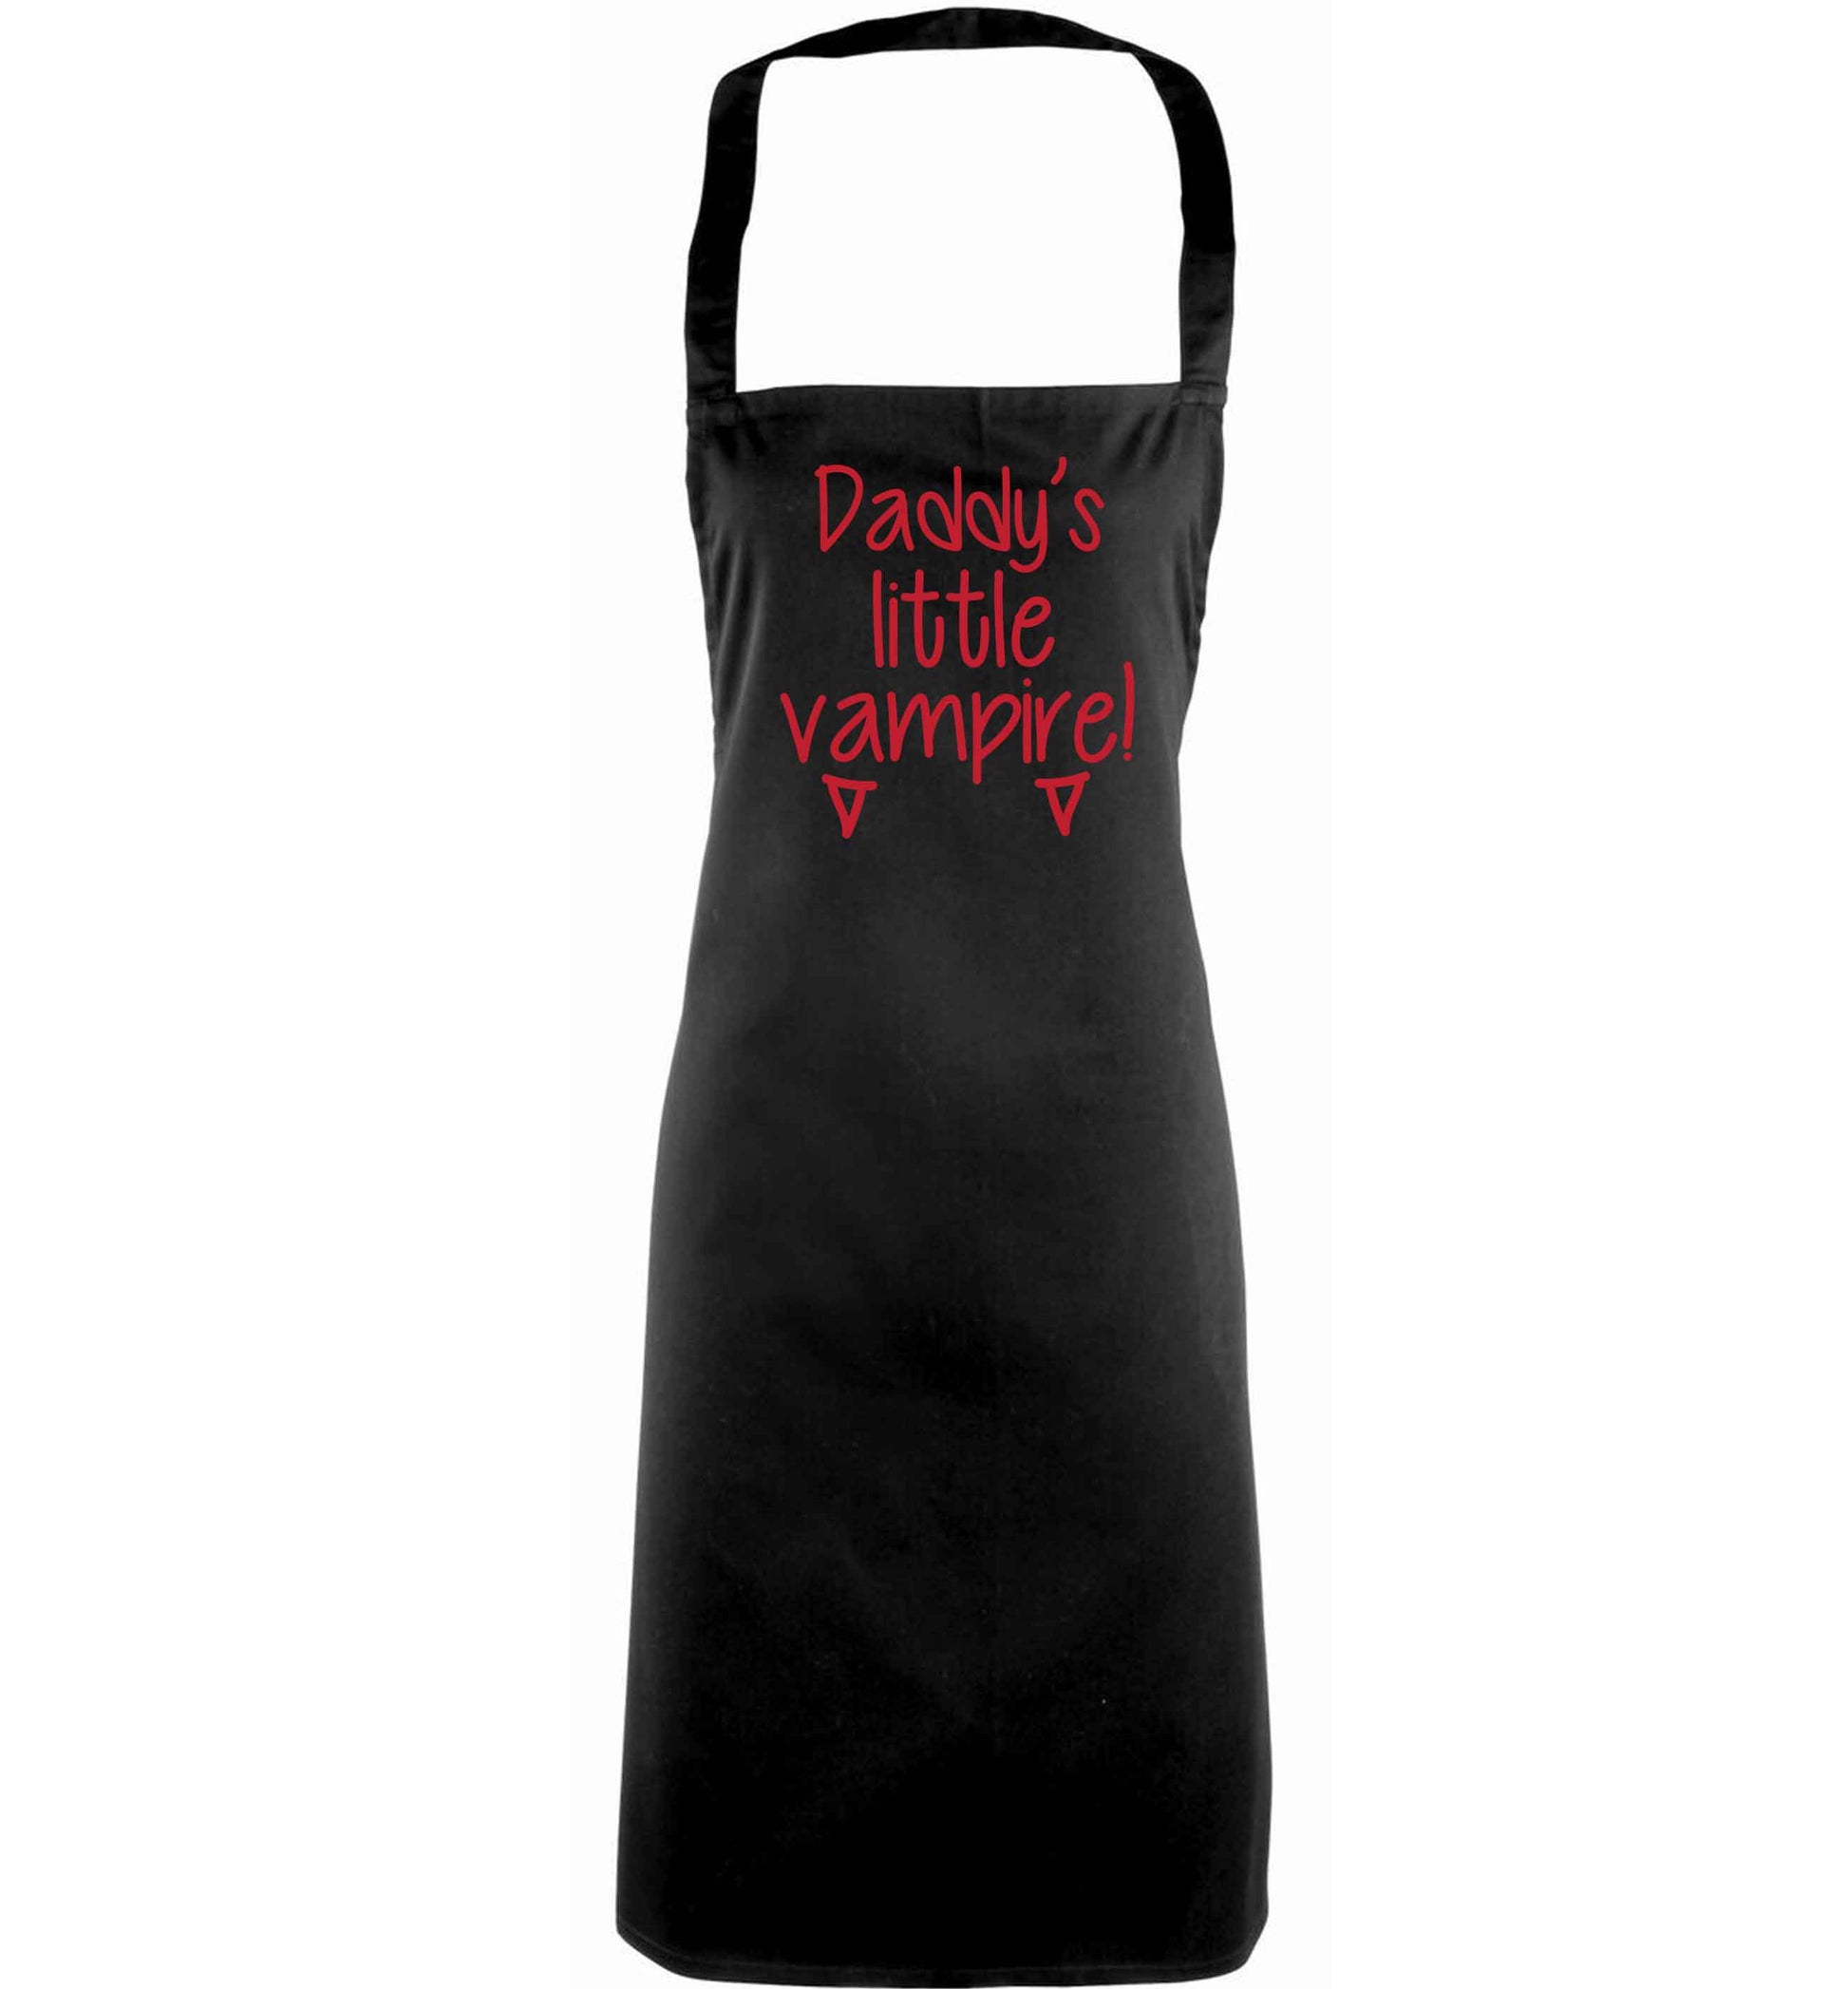 Daddy's little vampire adults black apron